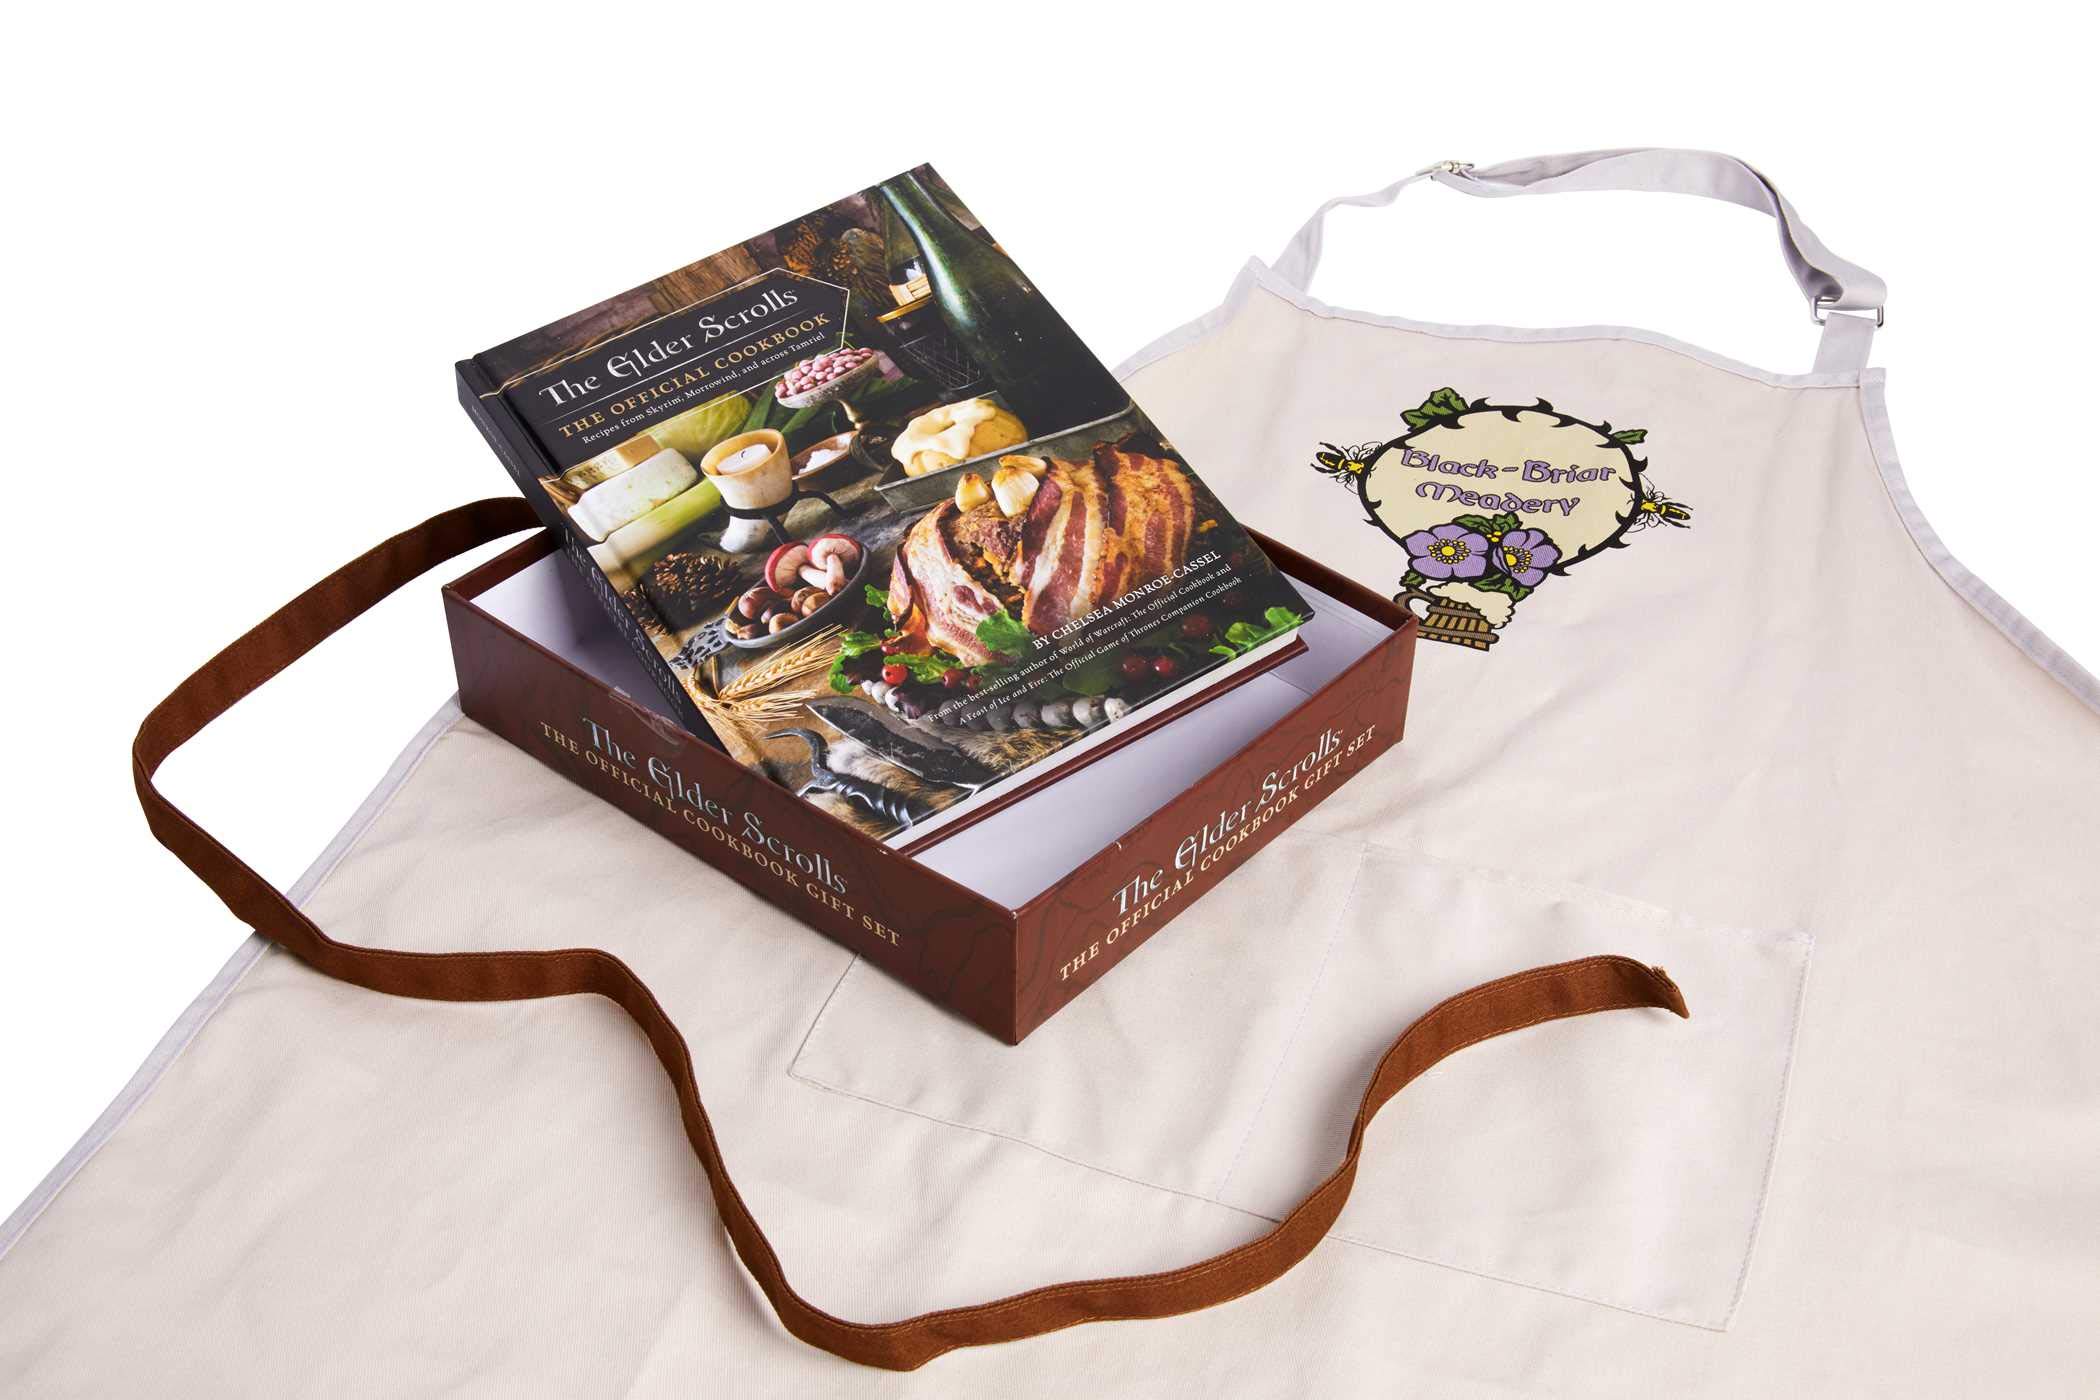 The Elder Scrolls®: The Official Cookbook Gift Set: (The Official Cookbook, Based on Bethesda Game Studios' RPG, Perfect Gift For Gamers)